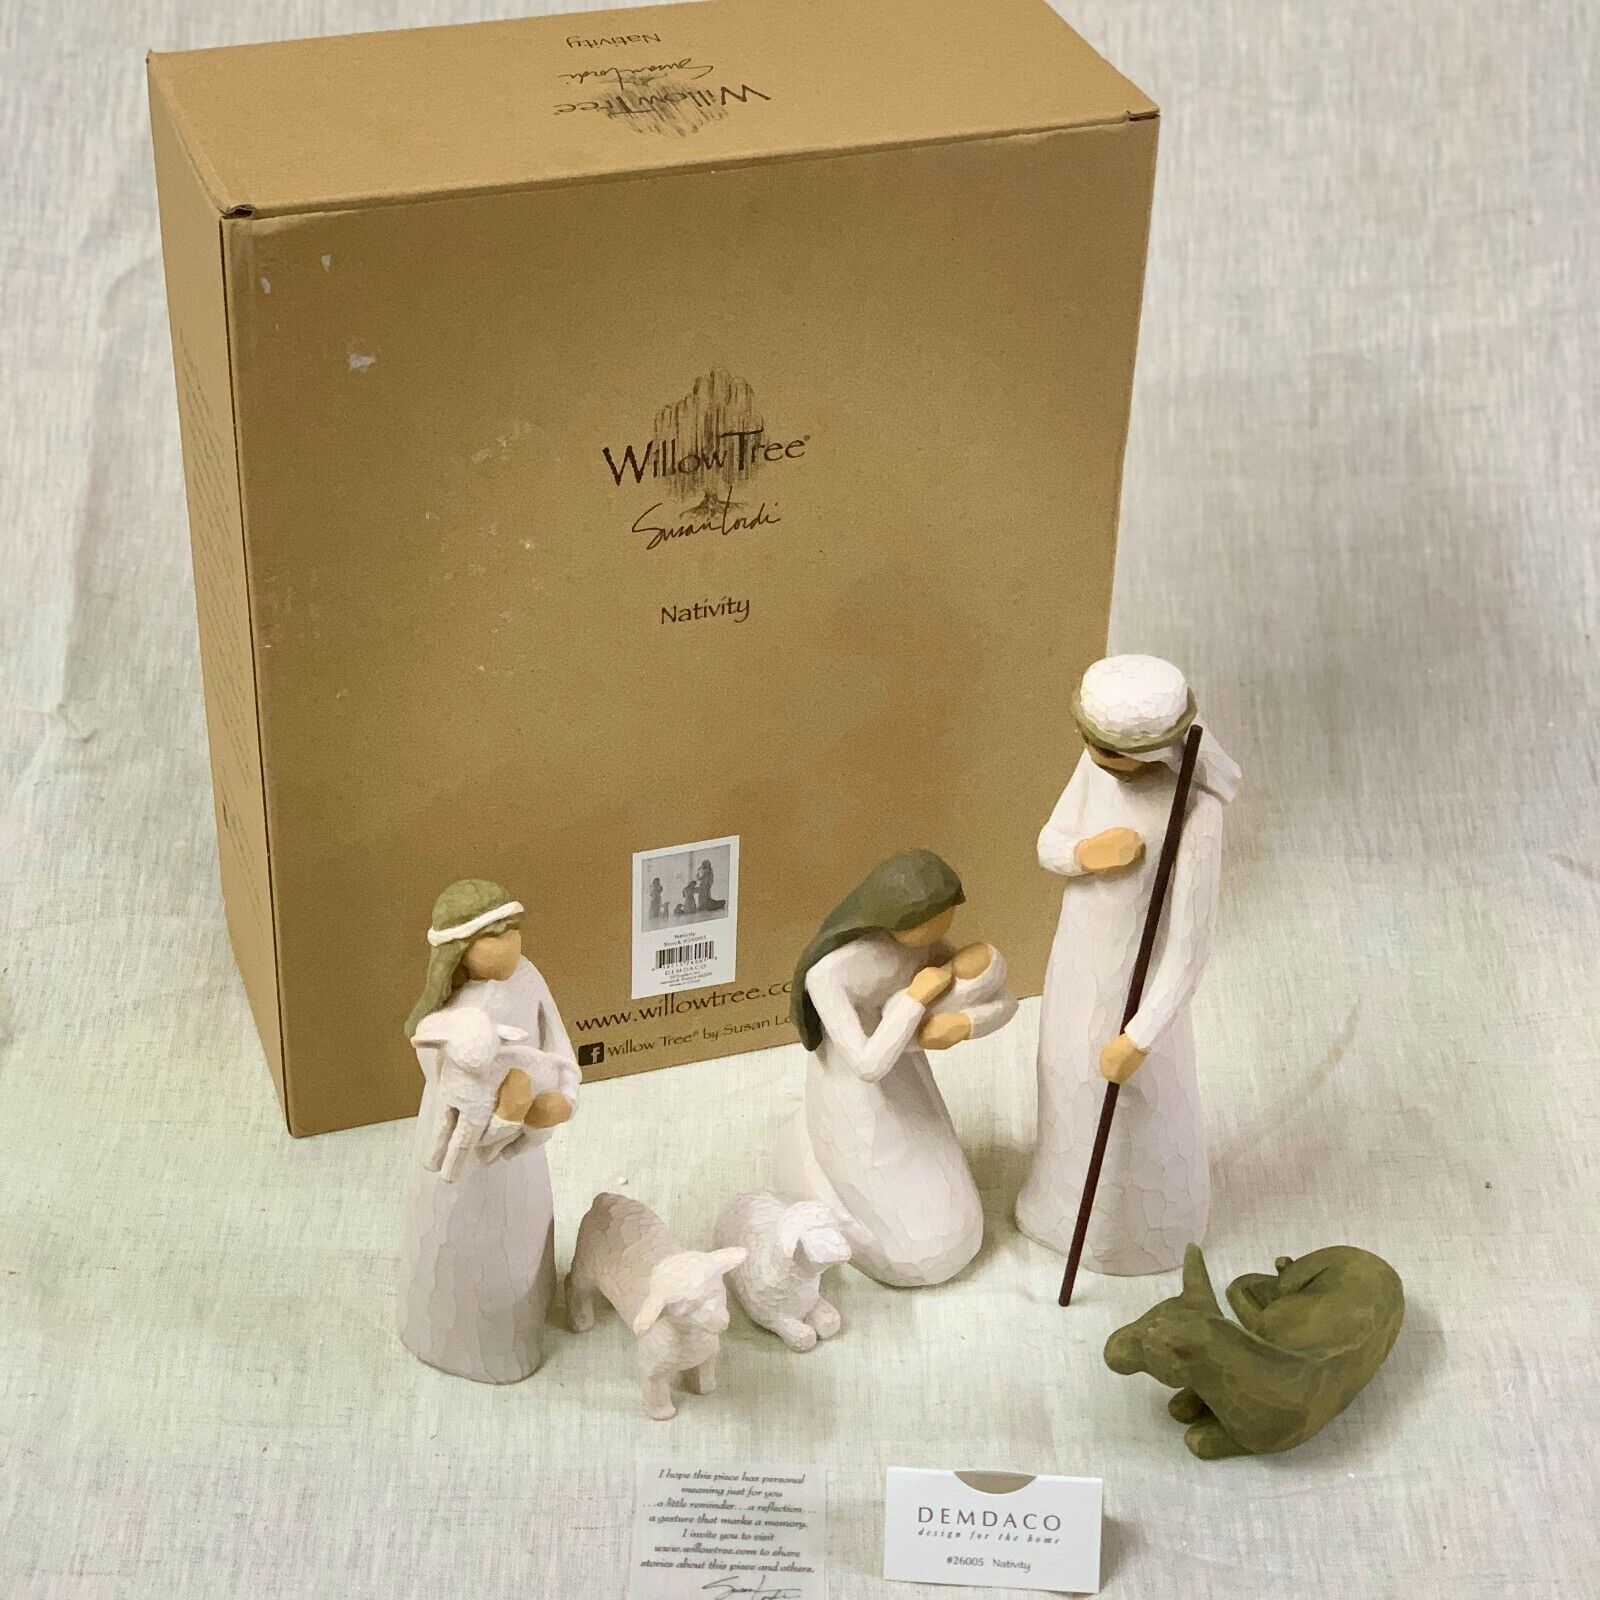 Willow Tree Nativity Set, Sculpted Hand-painted Nativity Figures, Nativity Gift